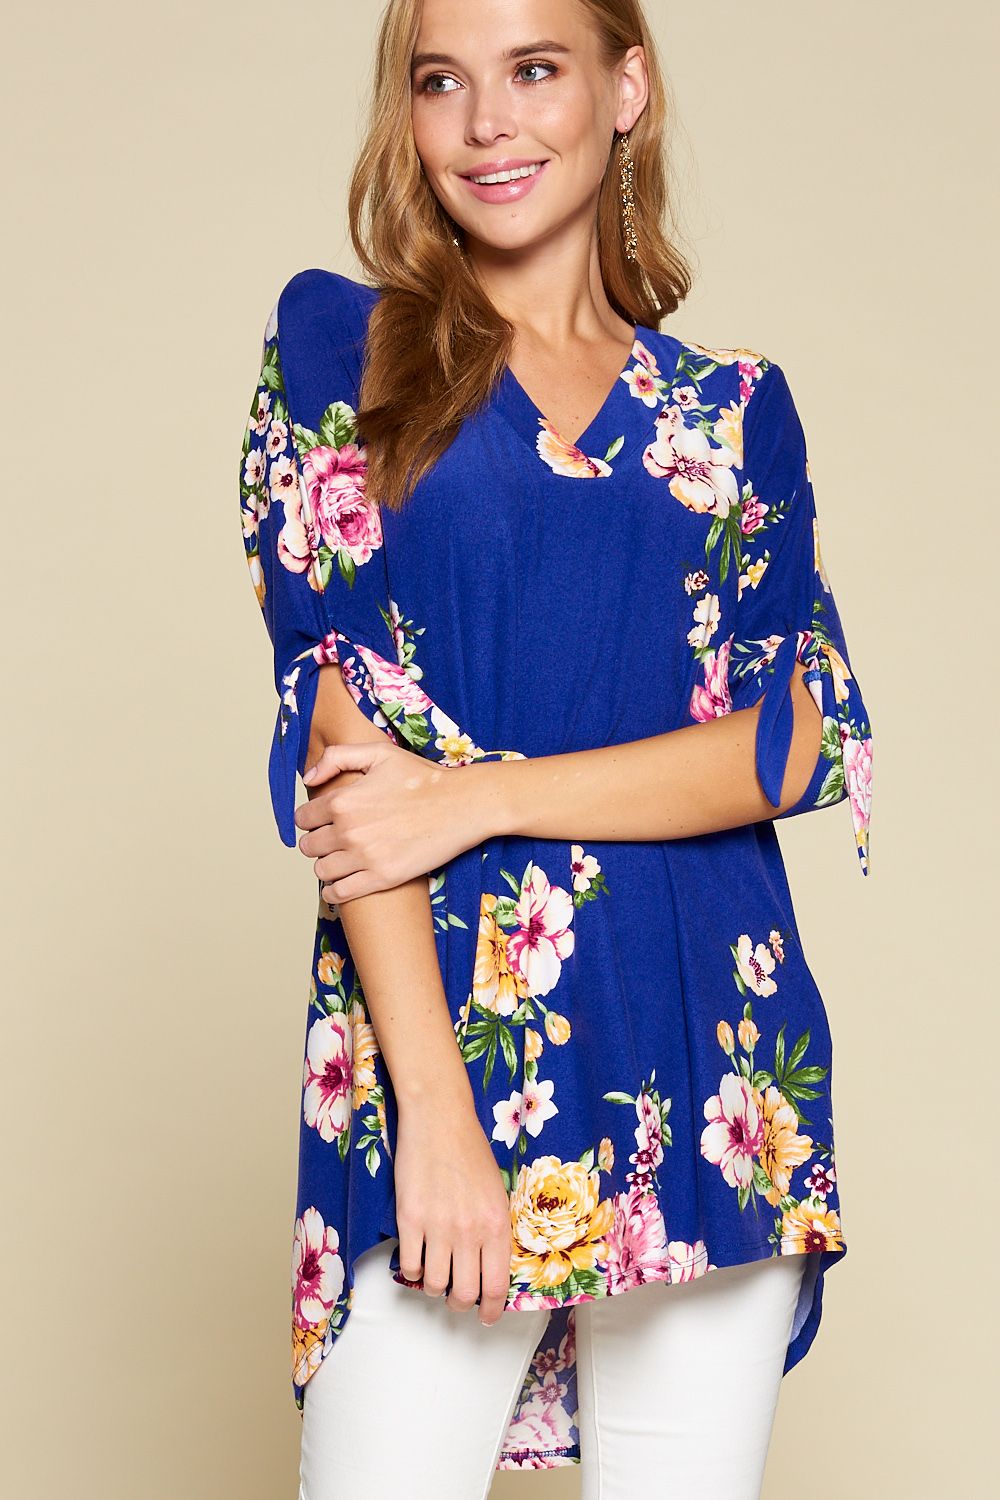 Floral Swing Top with Bow Sleeves